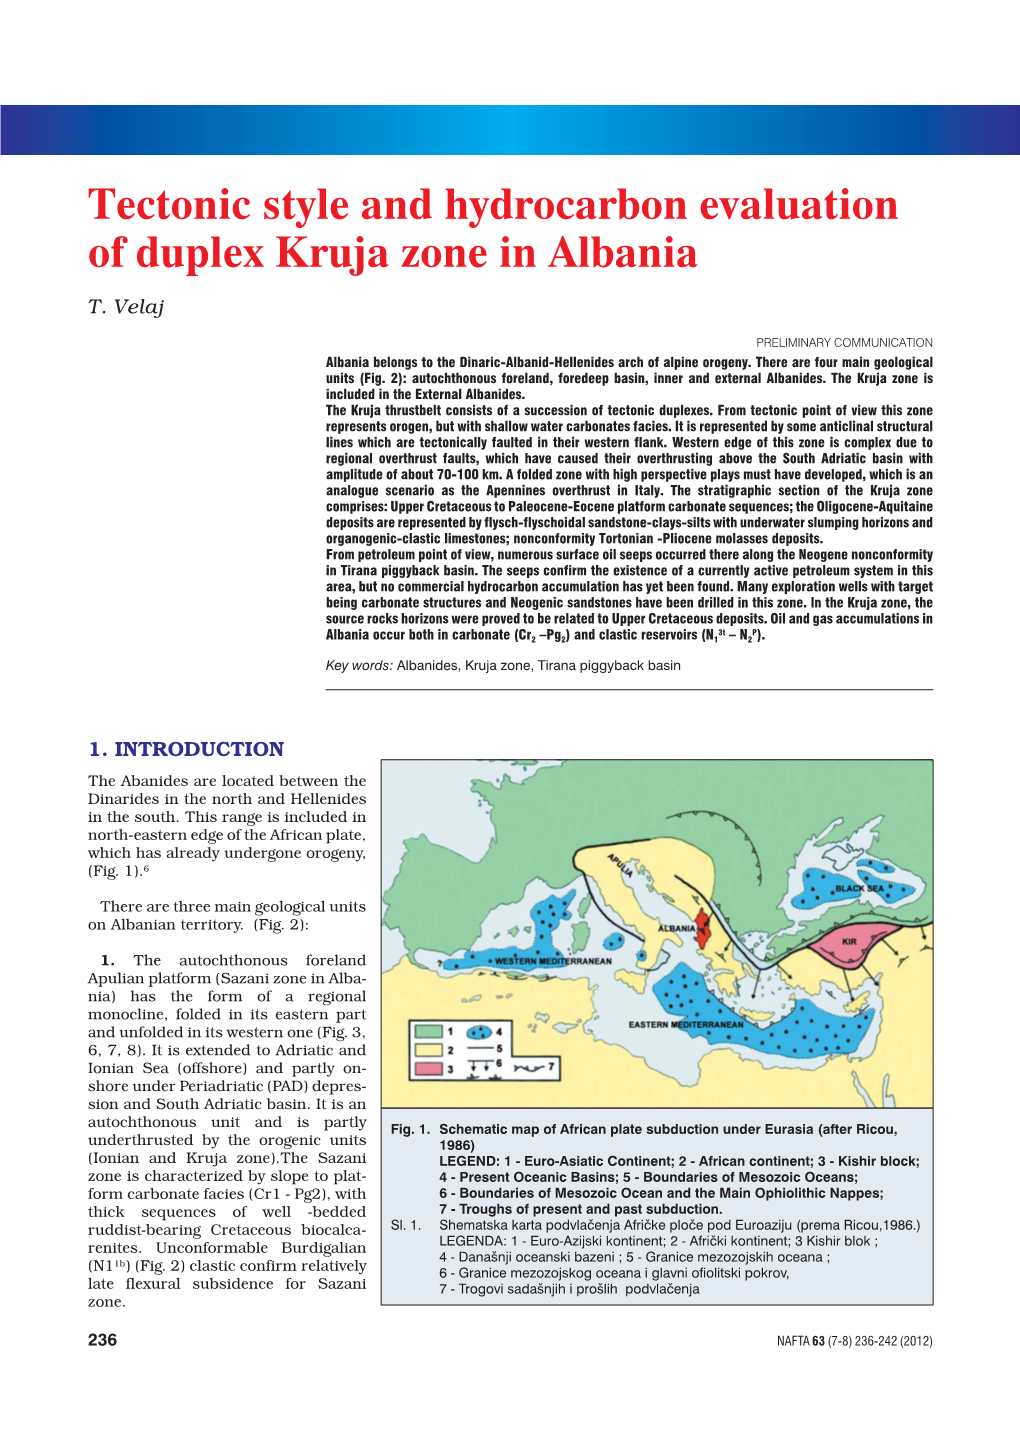 Tectonic Style and Hydrocarbon Evaluation of Duplex Kruja Zone in Albania